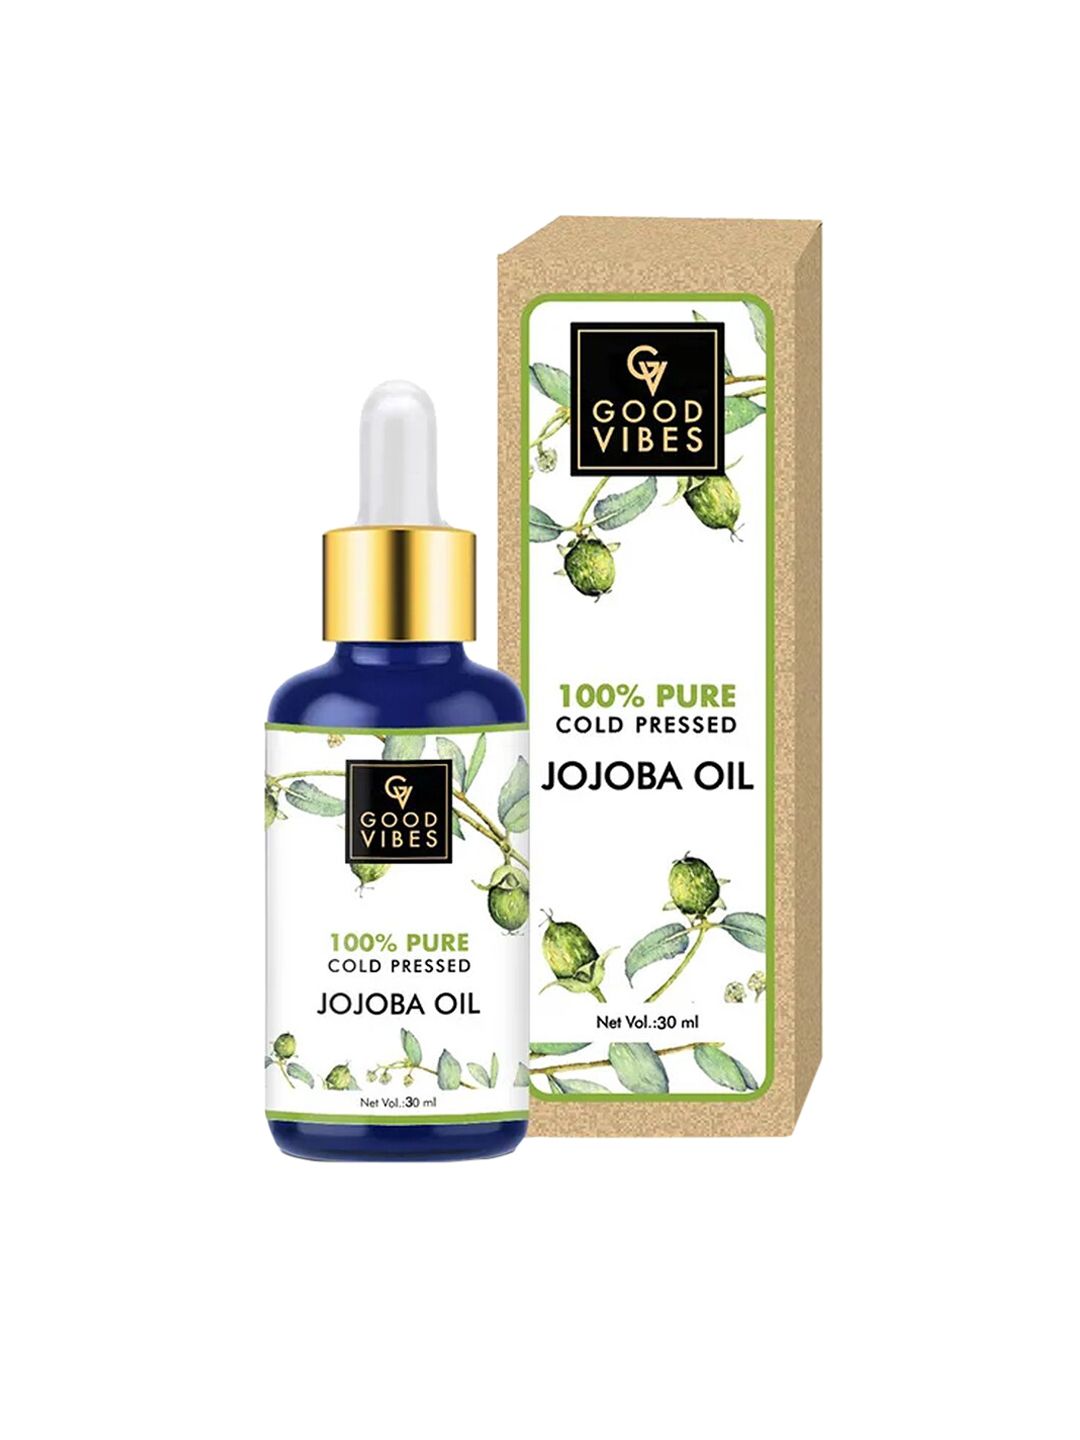 Good Vibes 100% Pure Jojoba Coldpressed Carrier Oil 30 ml Price in India